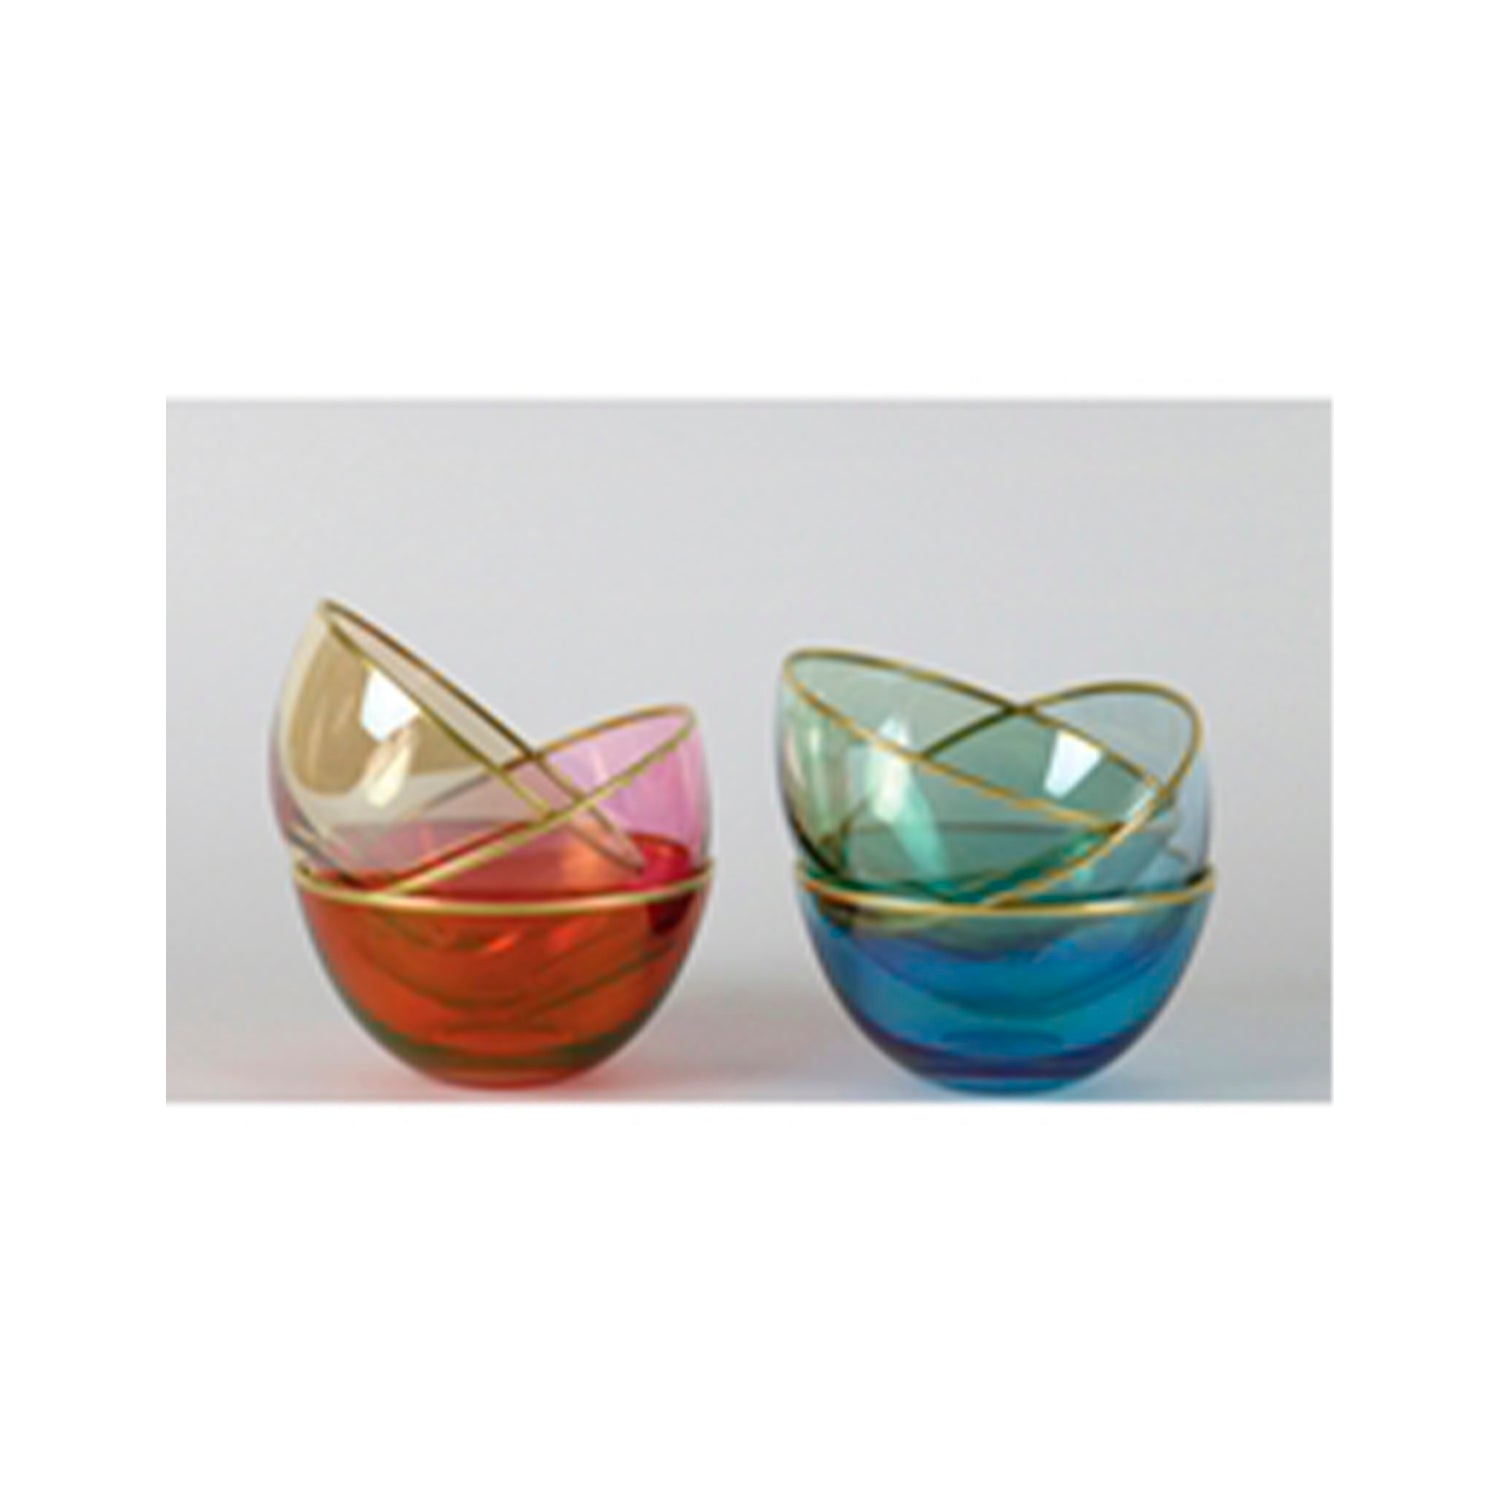 COLORED GLASS BOWLS X 6